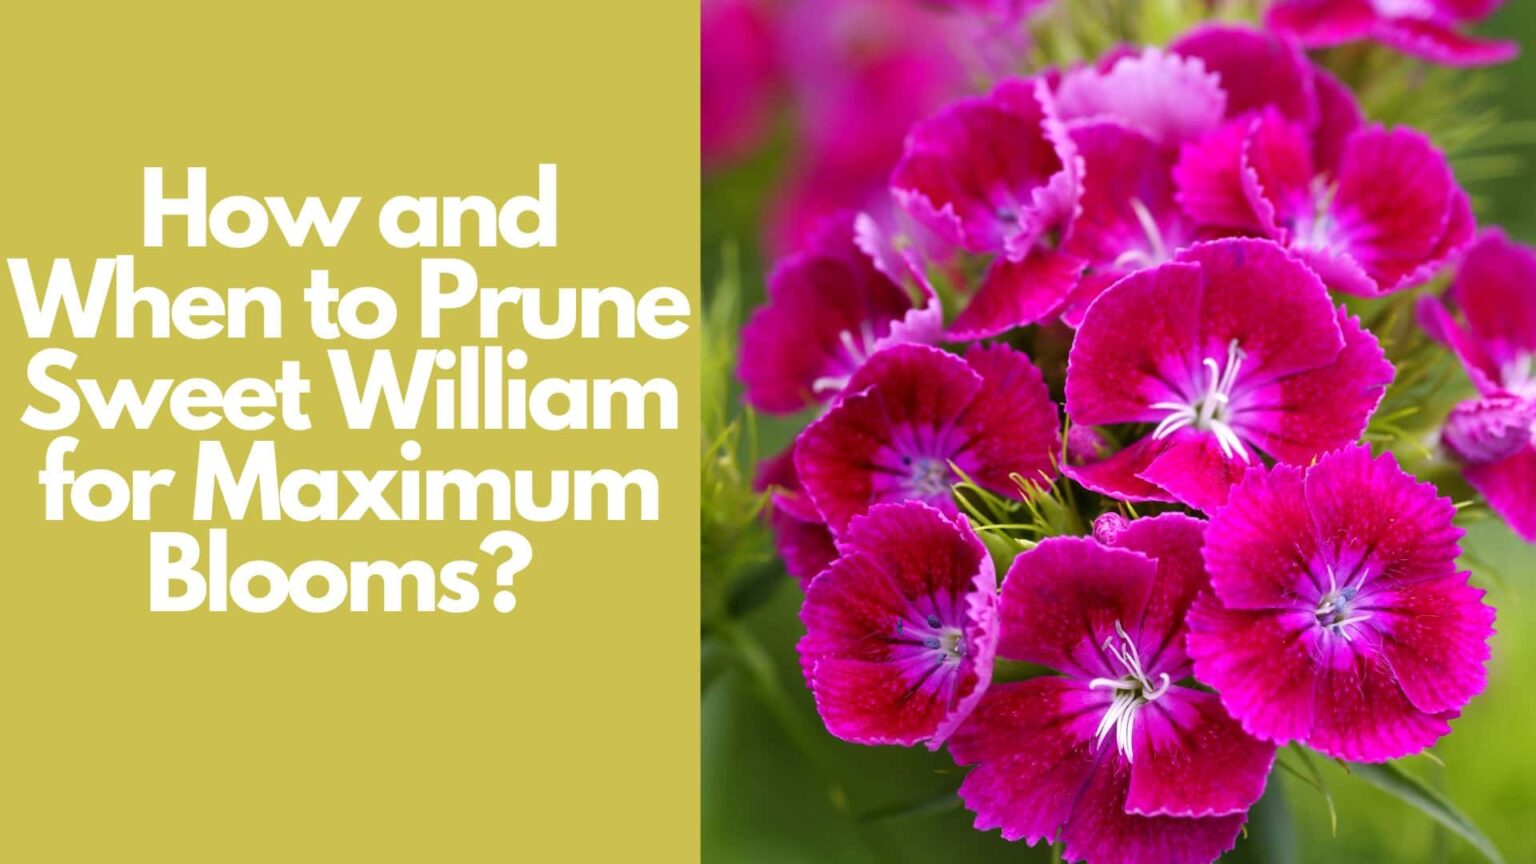 How to Prune Sweet William for Maximum Blooms: 3 Steps Guide